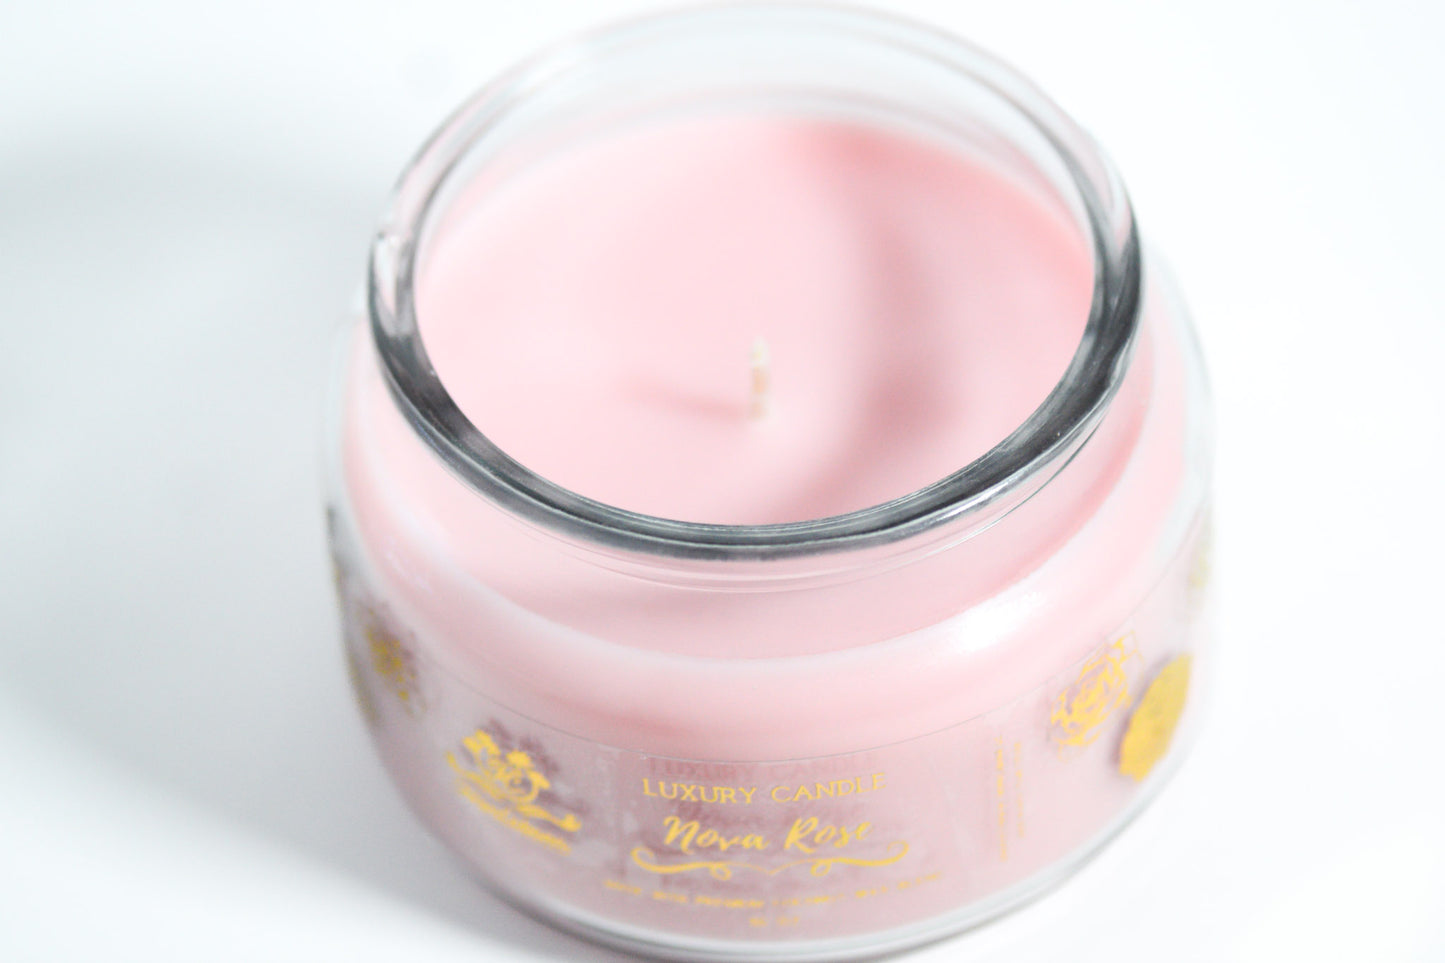 TropaCabana, 10 oz Nova Rose Candle, Floral Fragrance, Pink Candle, Luxury Candle, Vegan Candle, Coconut Wax Candle, Valentine's Candle, Gifts for her, anniversary gift, mother's day gift